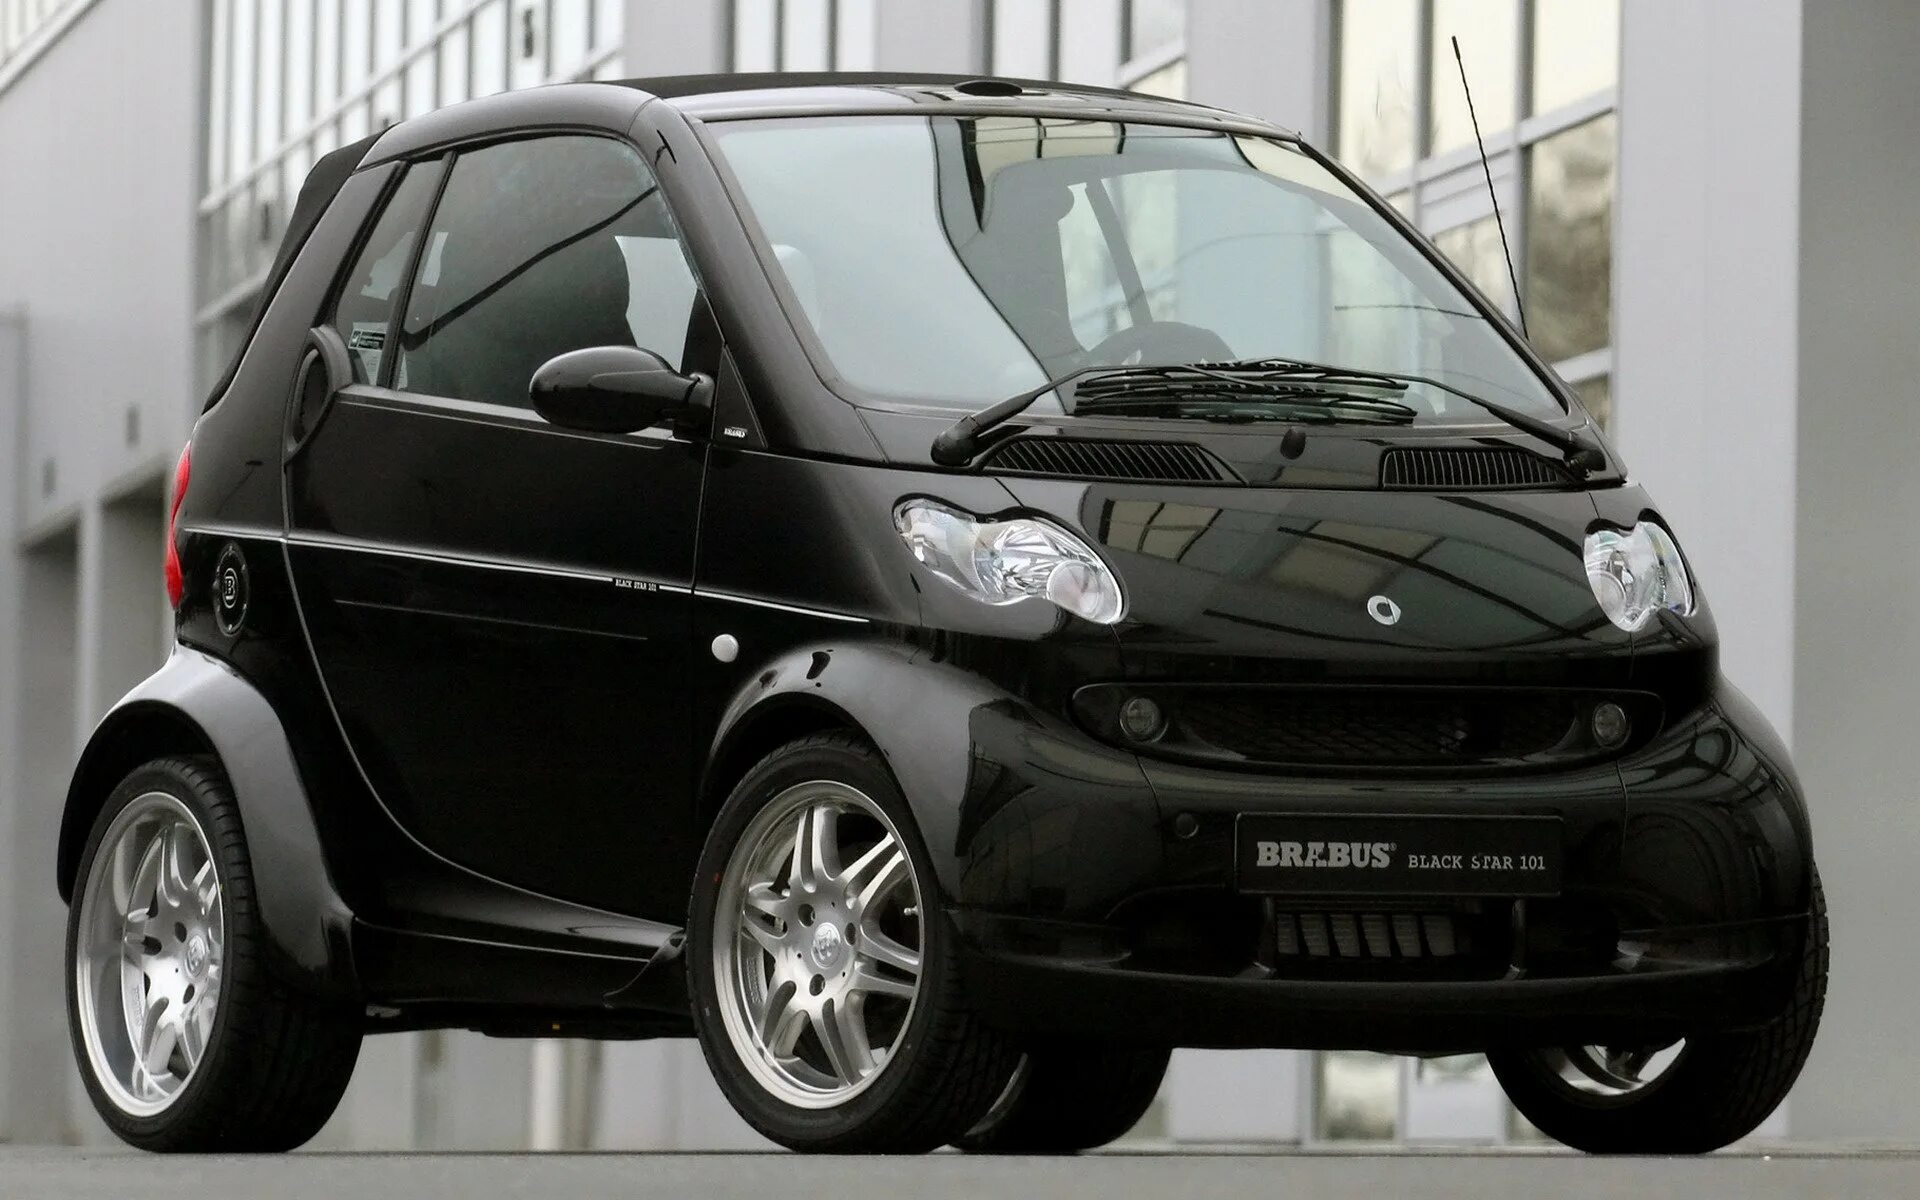 Мерседес смарт Брабус. Smart Fortwo Brabus 2006 Black Star 101. Mercedes Smart Fortwo. Smart Fortwo 2002.